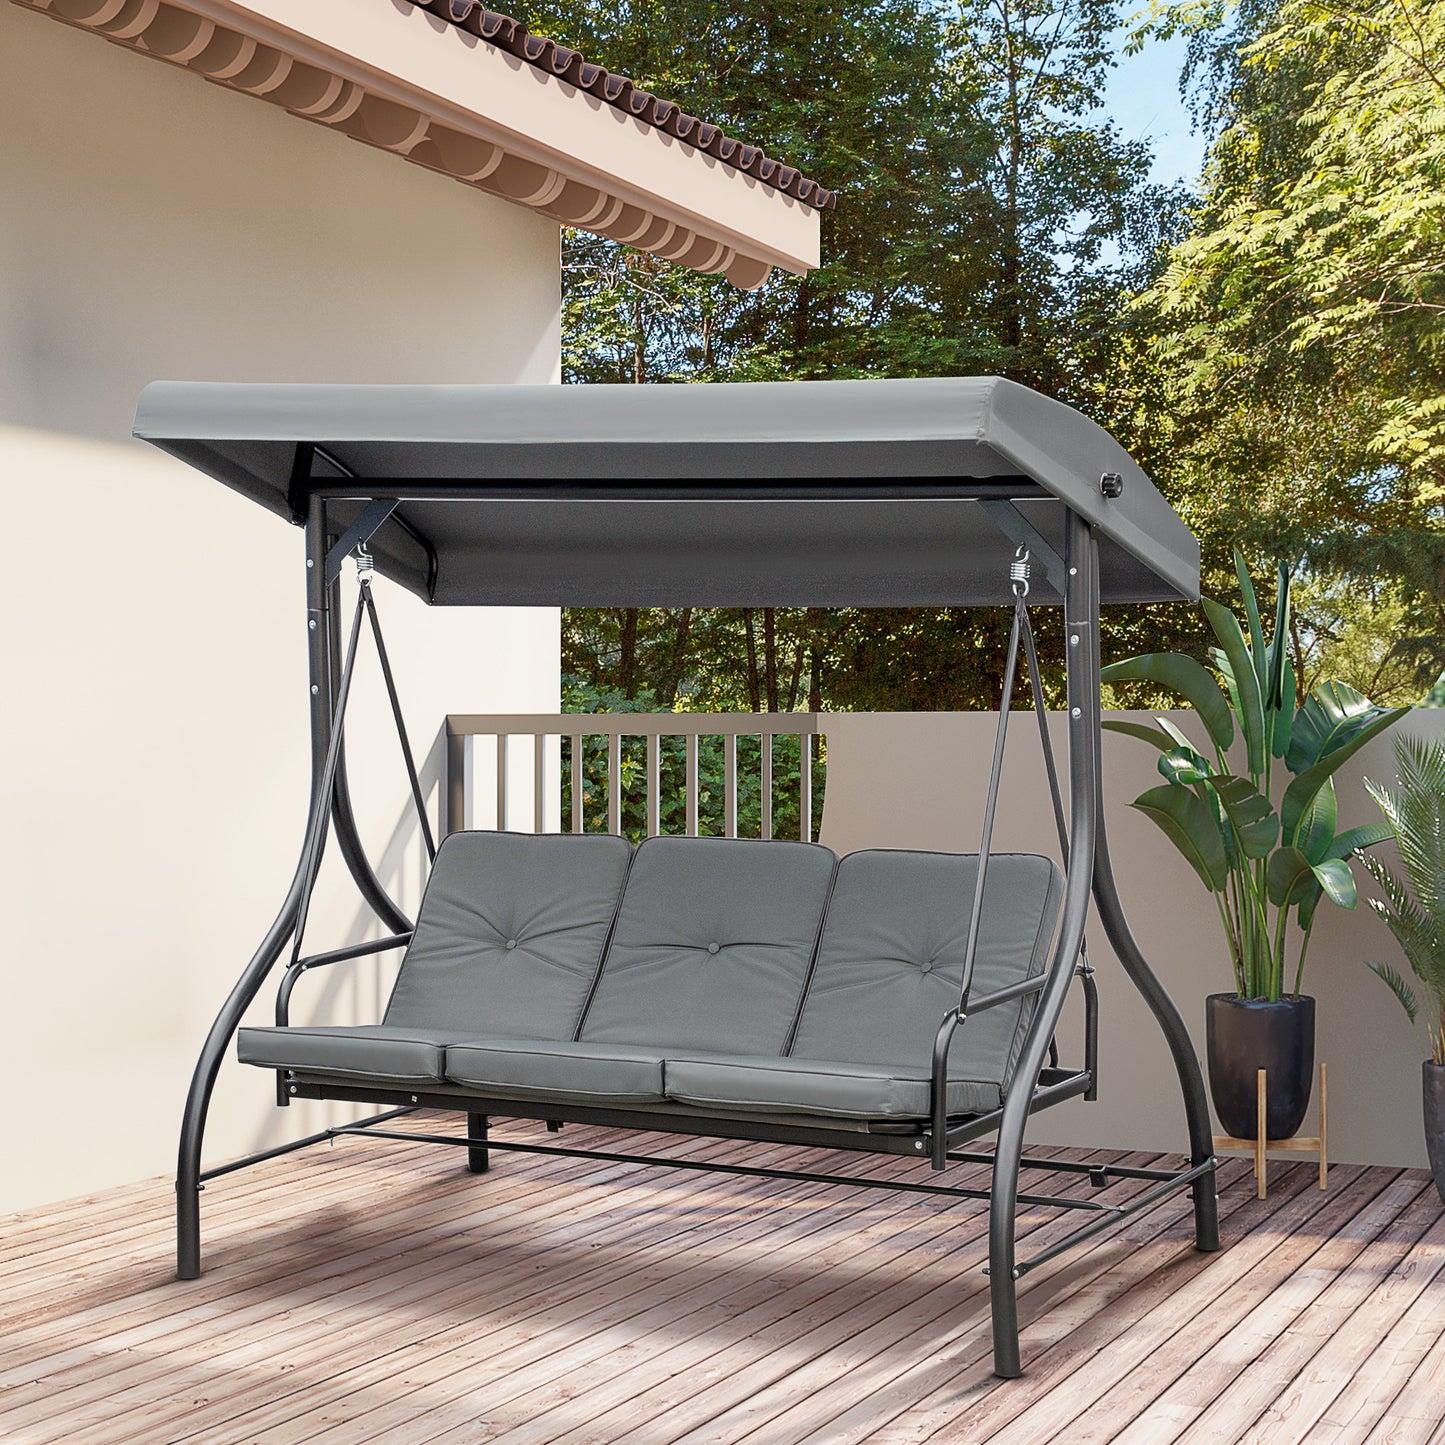 Outsunny Three-Seater Garden Swing, with Adjustable Canopy - Dark Grey